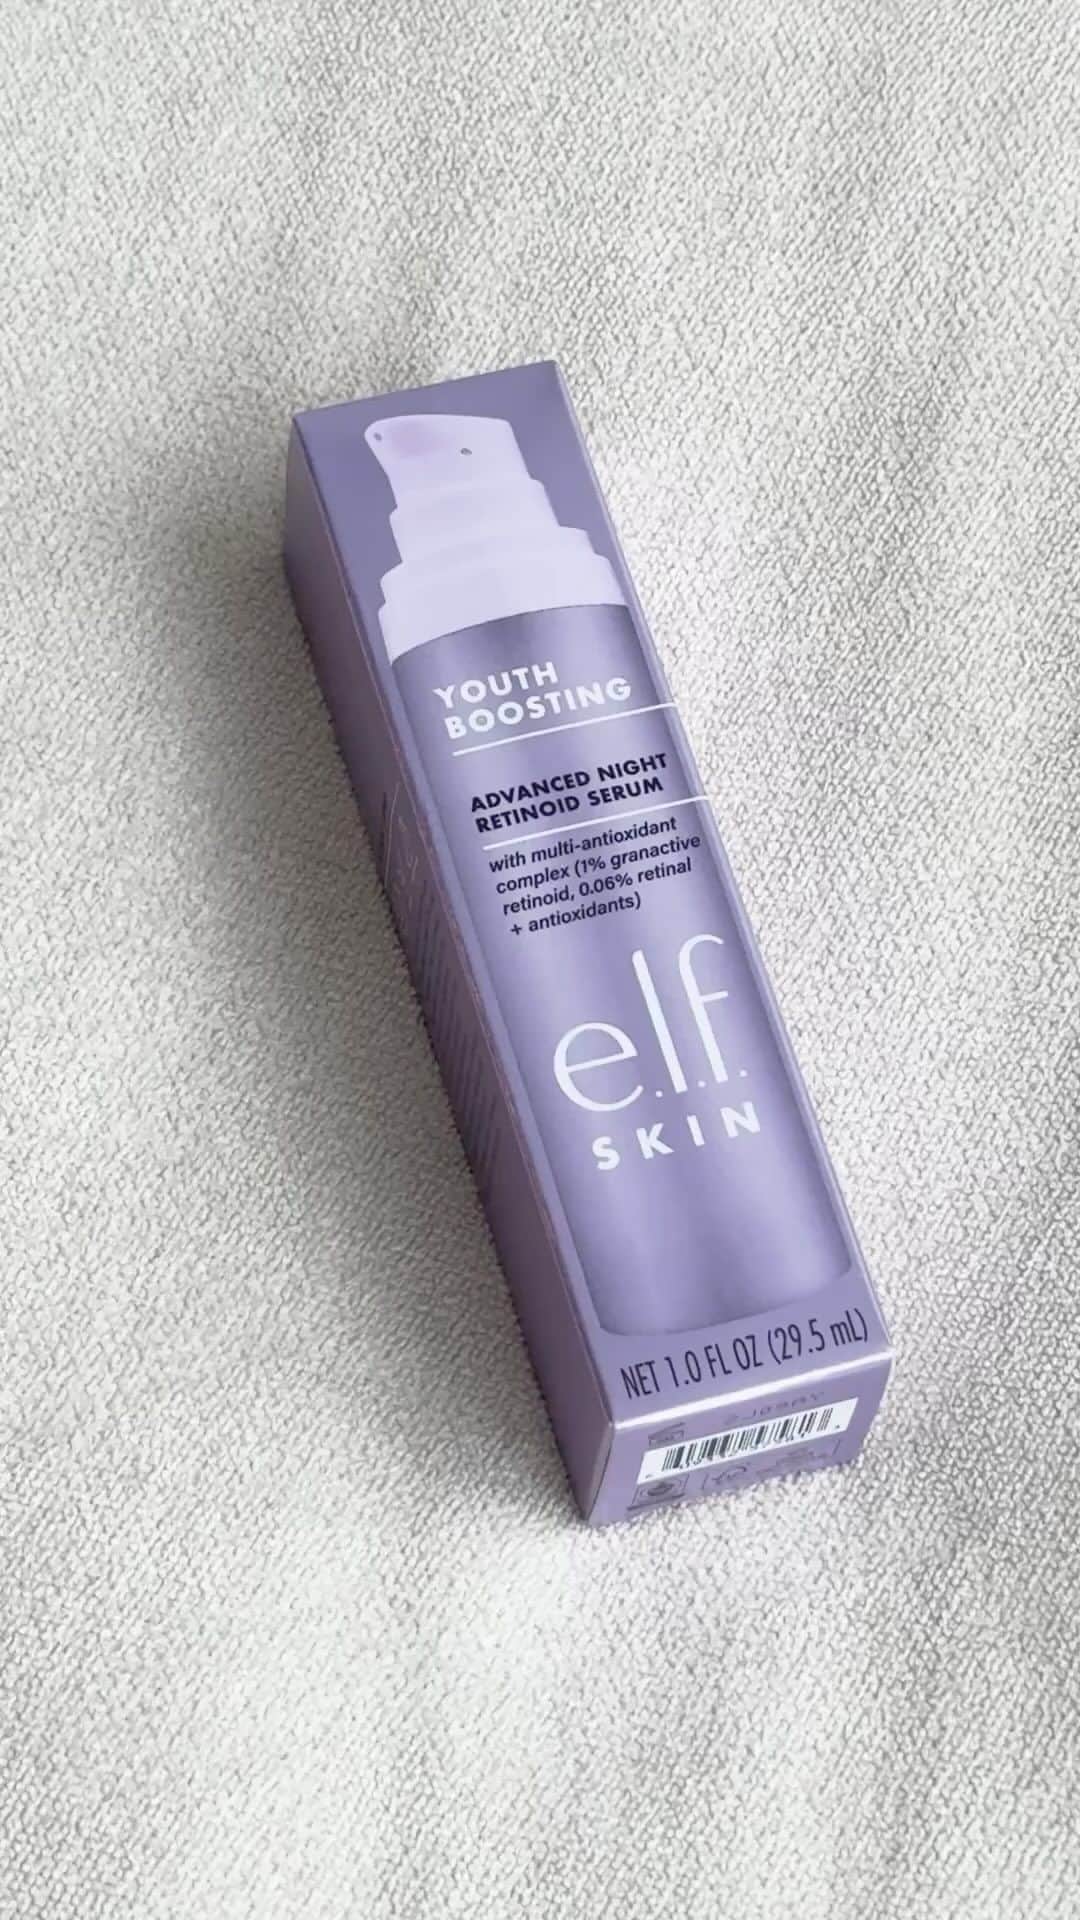 e.l.f.のインスタグラム：「Let your skin do the talking with e.l.f. SKIN’s Youth Boosting Advanced Night Retinoid Serum! 💜   This powerful anti-aging serum reduces the appearance of fine lines and wrinkles over time for rejuvenated, smooth, and radiant skin! ✨ Supercharged with hyaluronic acid, antioxidants and 1% granactive retinoid, this formula helps to brighten & hydrate skin. 💦   Tap to shop for only $22! 🙌   #elfskin #eyeslipsface #elfingamazing #crueltyfree #vegan」